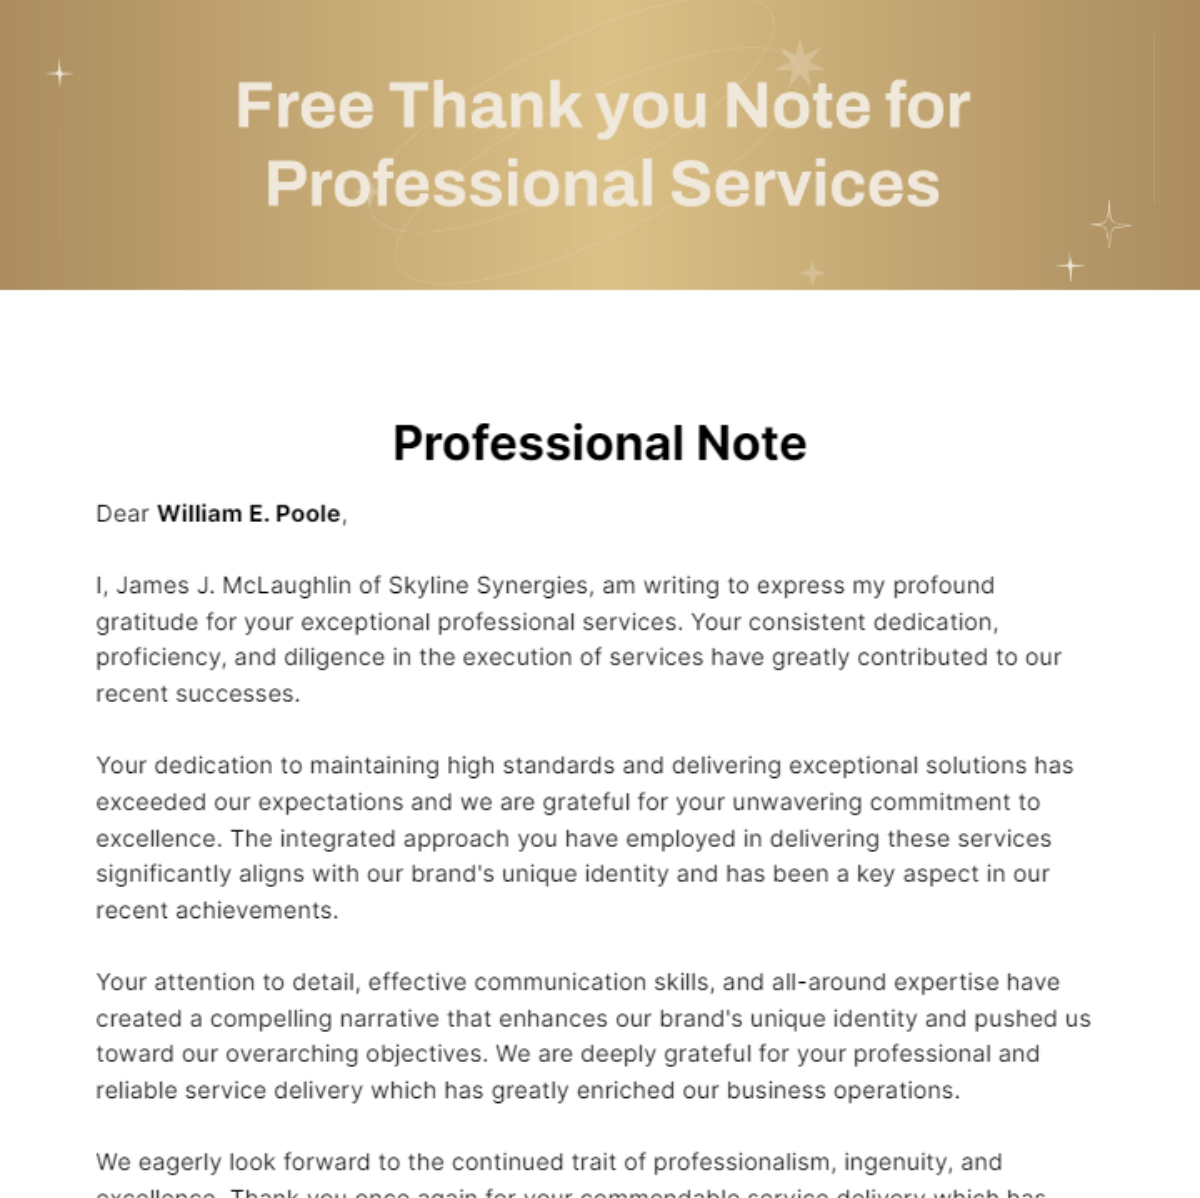 Free Thank you Note for Professional Services Template